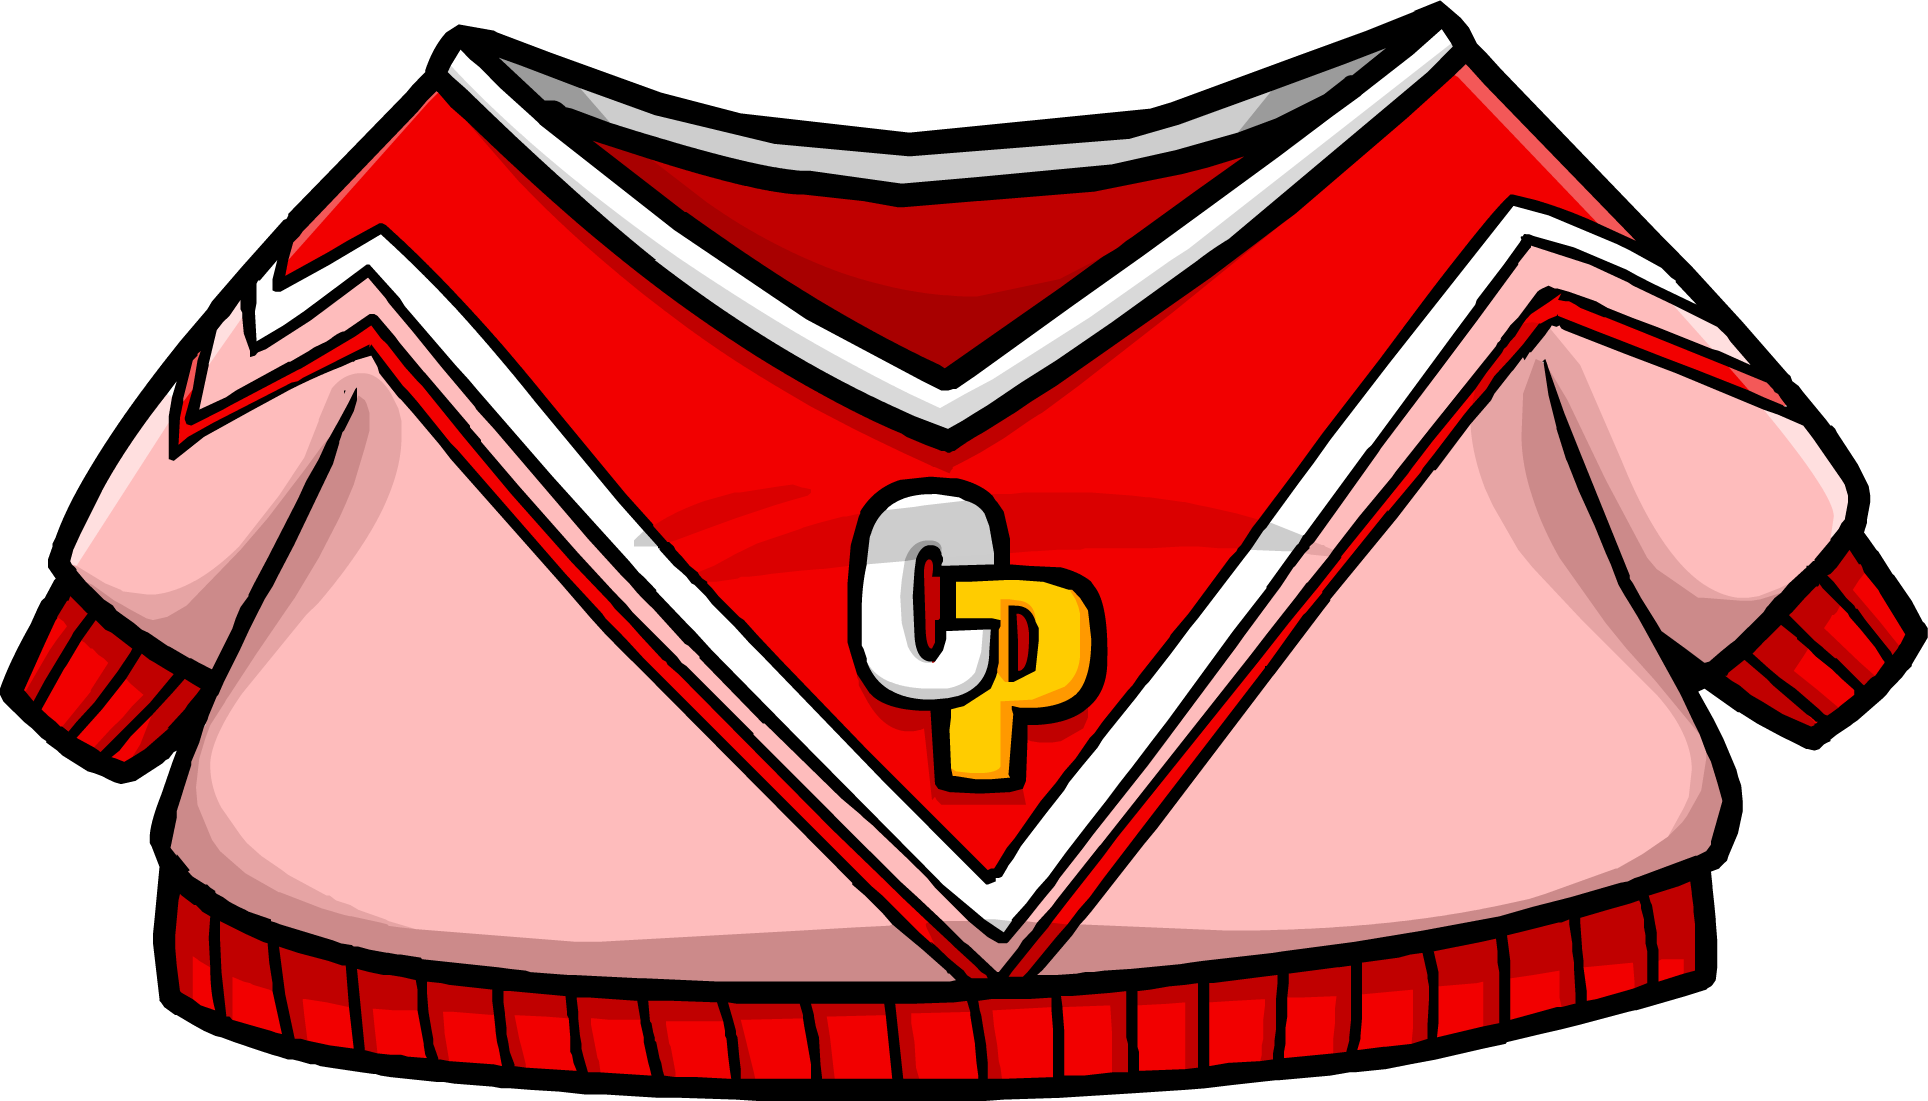 Clipart clothes cheerleader. Image red cheerleading sweater